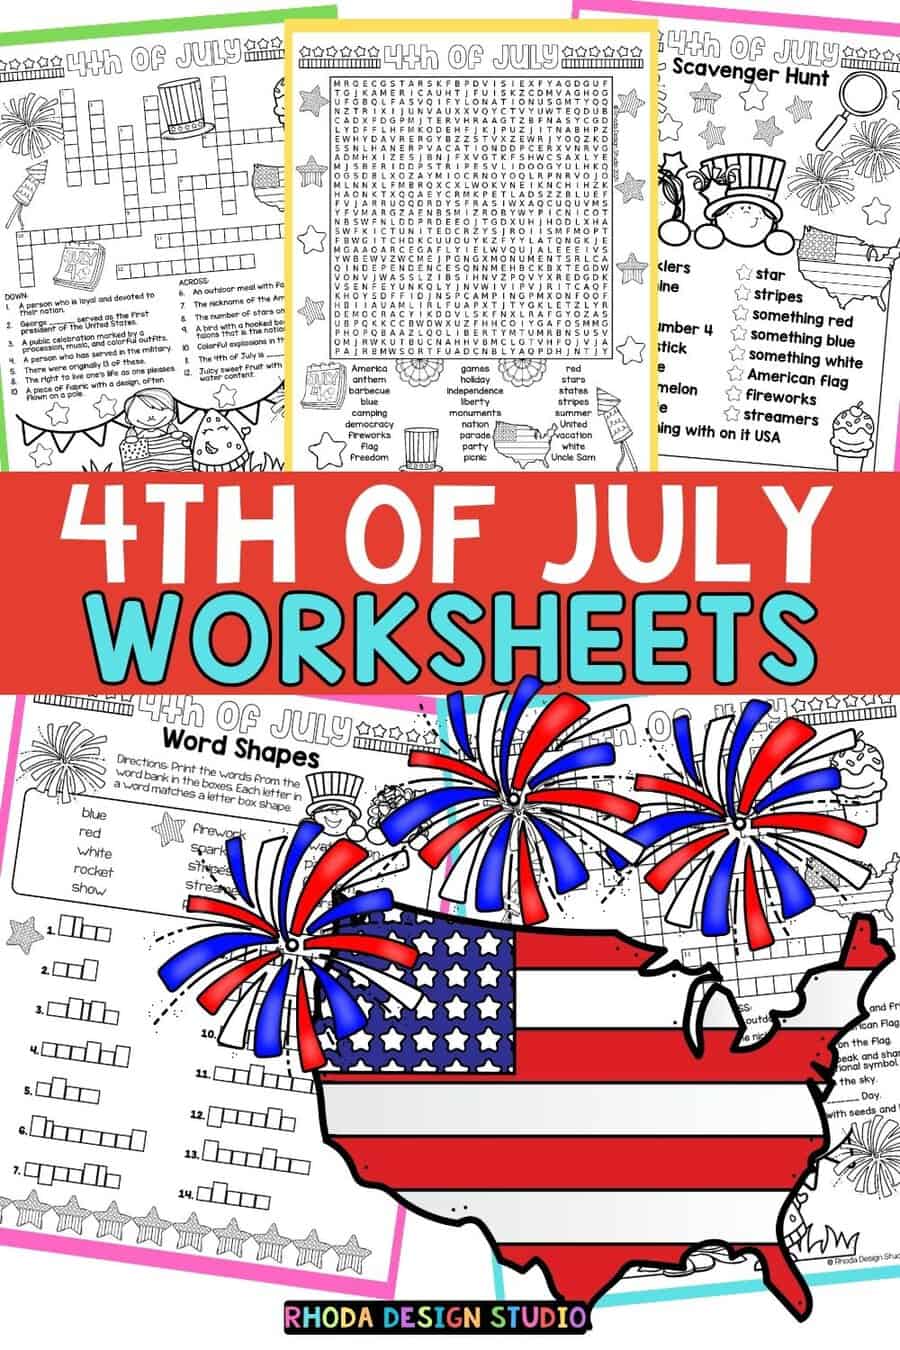 4th-of-july-printable-worksheets-crosswords-wordsearches-2